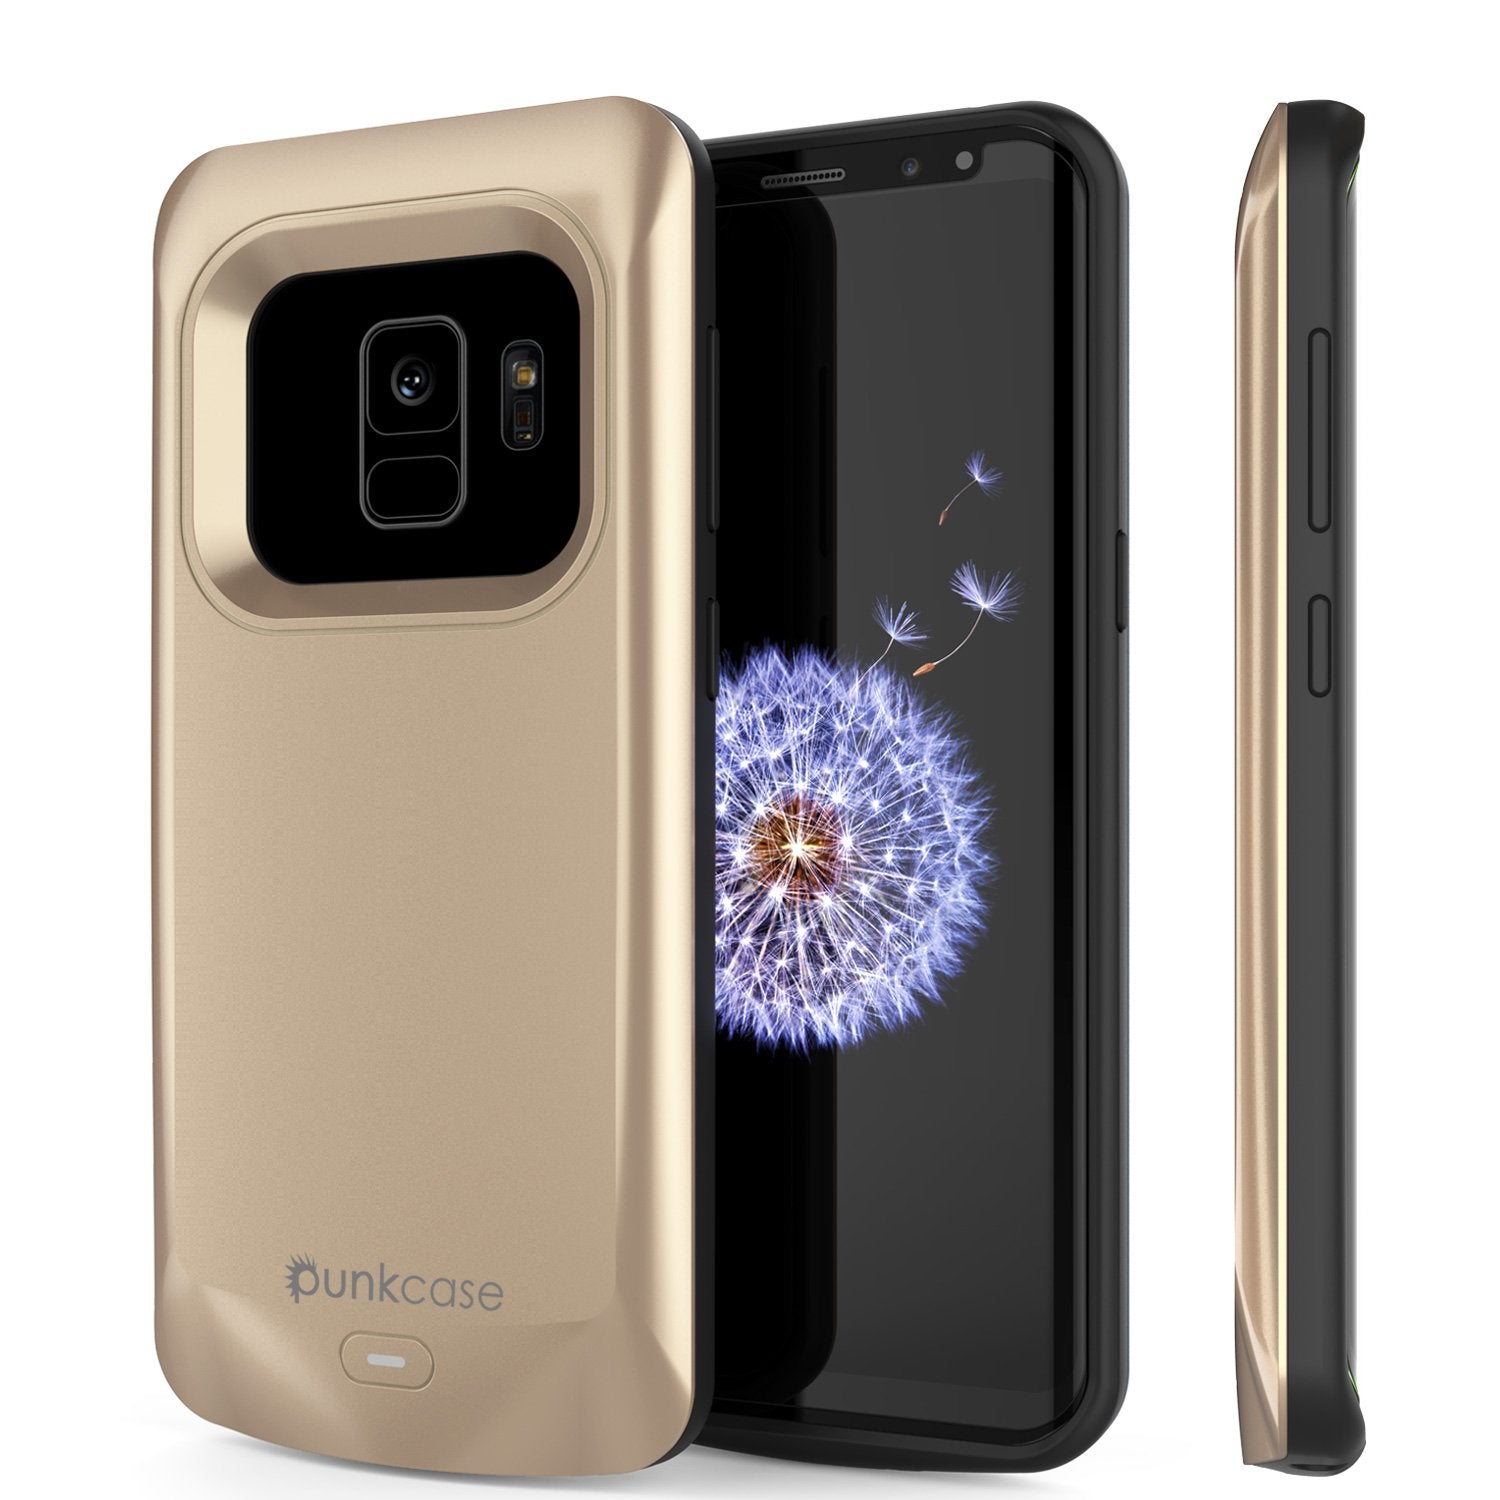 Galaxy S9 Battery Case, PunkJuice 5000mAH Fast Charging Power Bank W/ Screen Protector | Integrated USB Port | IntelSwitch | Slim, Secure and Reliable | Suitable for Samsung Galaxy S9 [Gold]